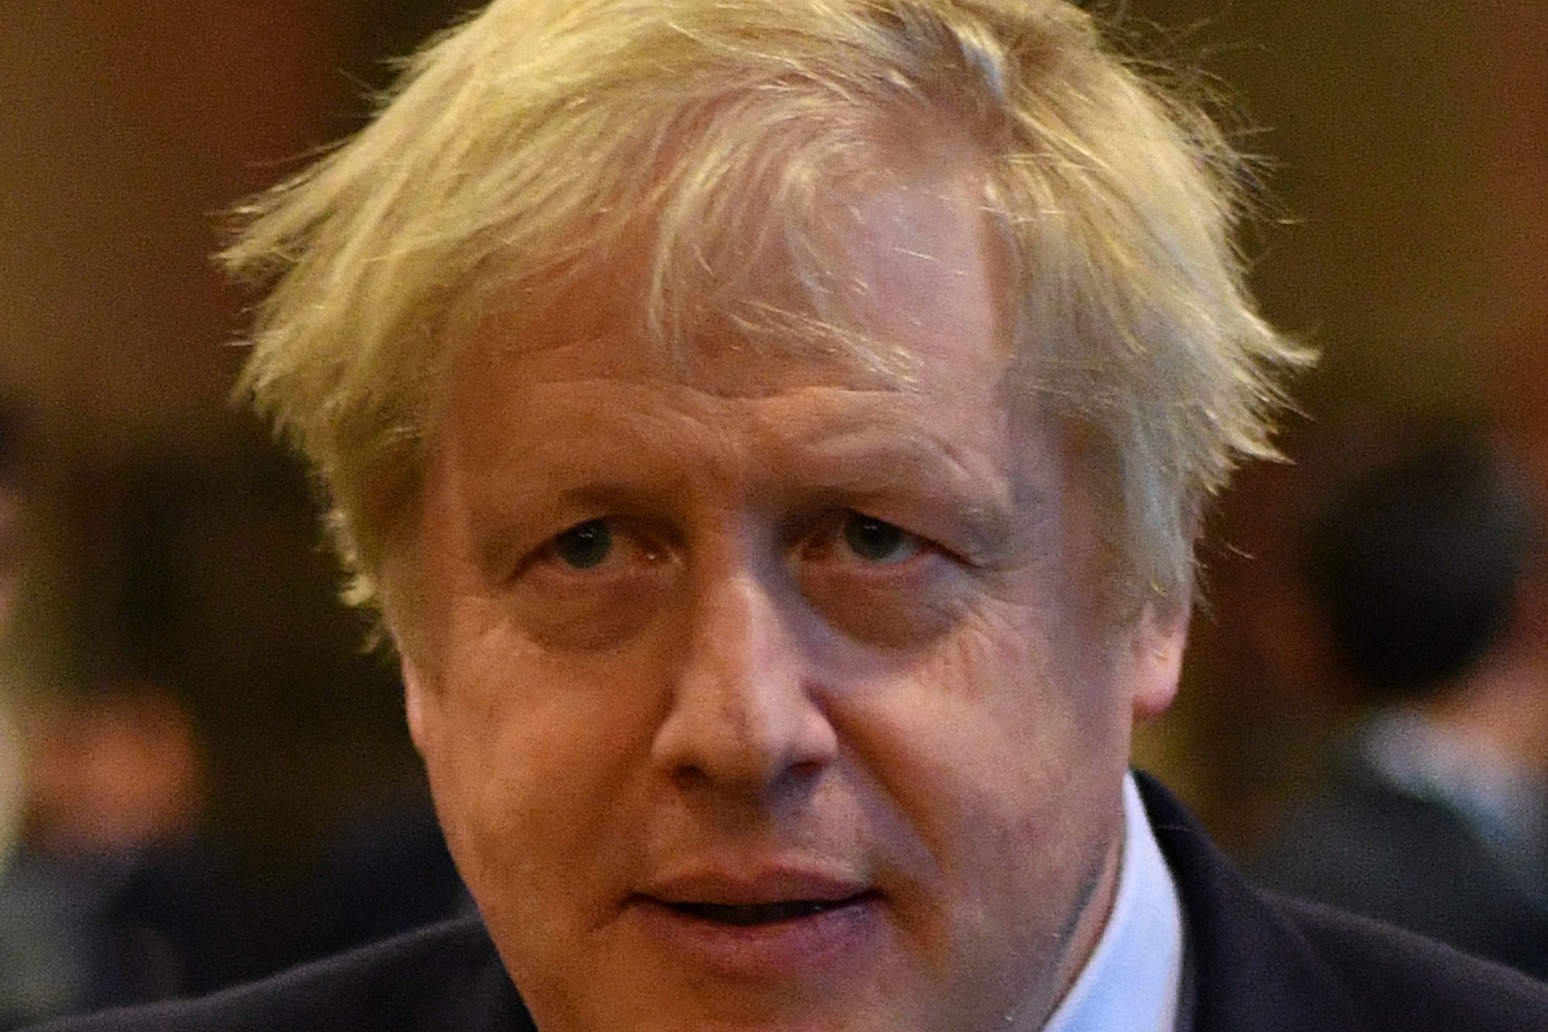 Boris Johnson: No need for UK to follow Brussels rules in new trade deal 